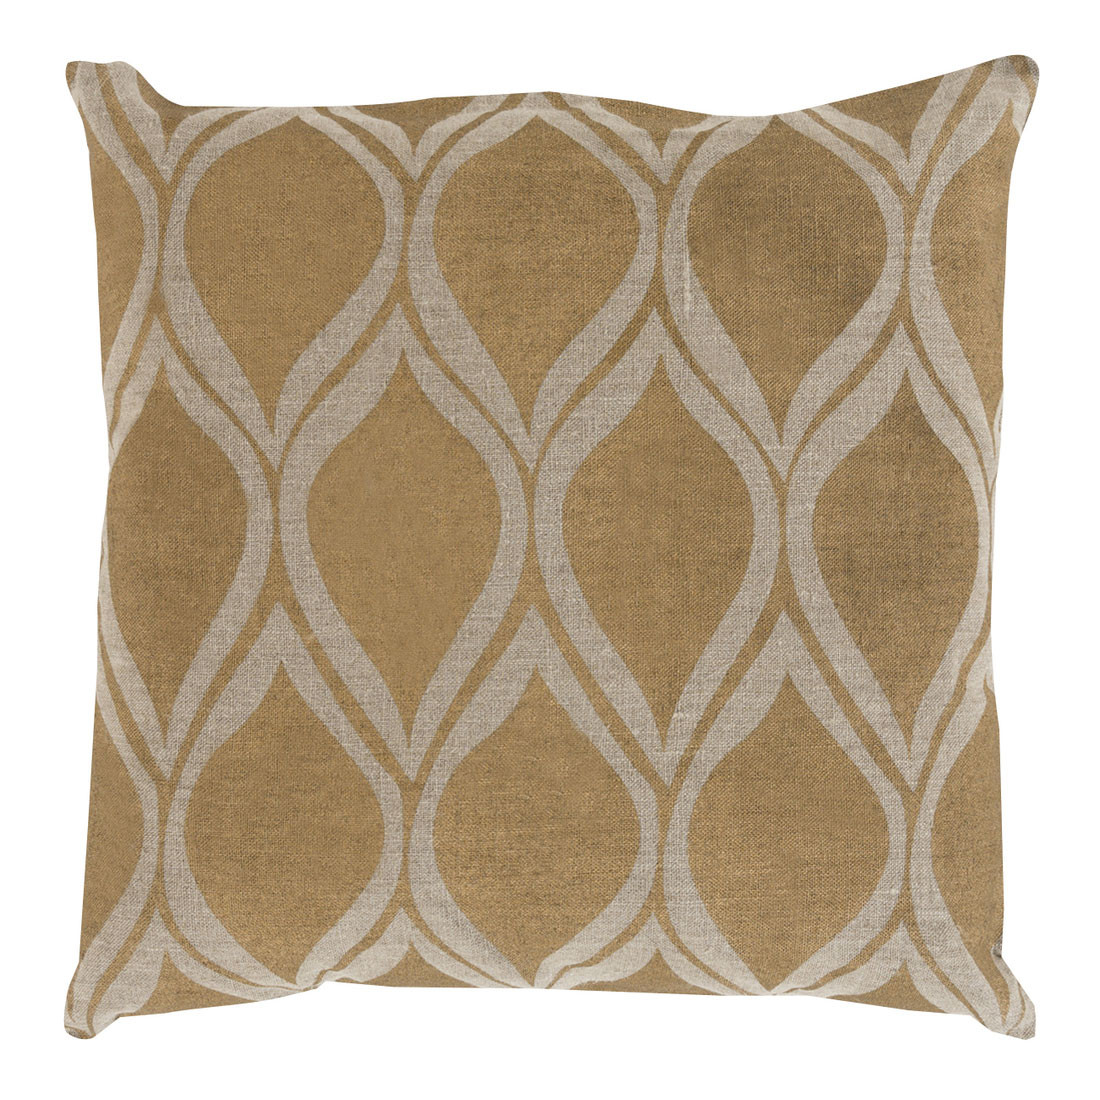 Stamped Linen Droplet Pillow - MS-001
18 x 18 inches
Linen
Gold